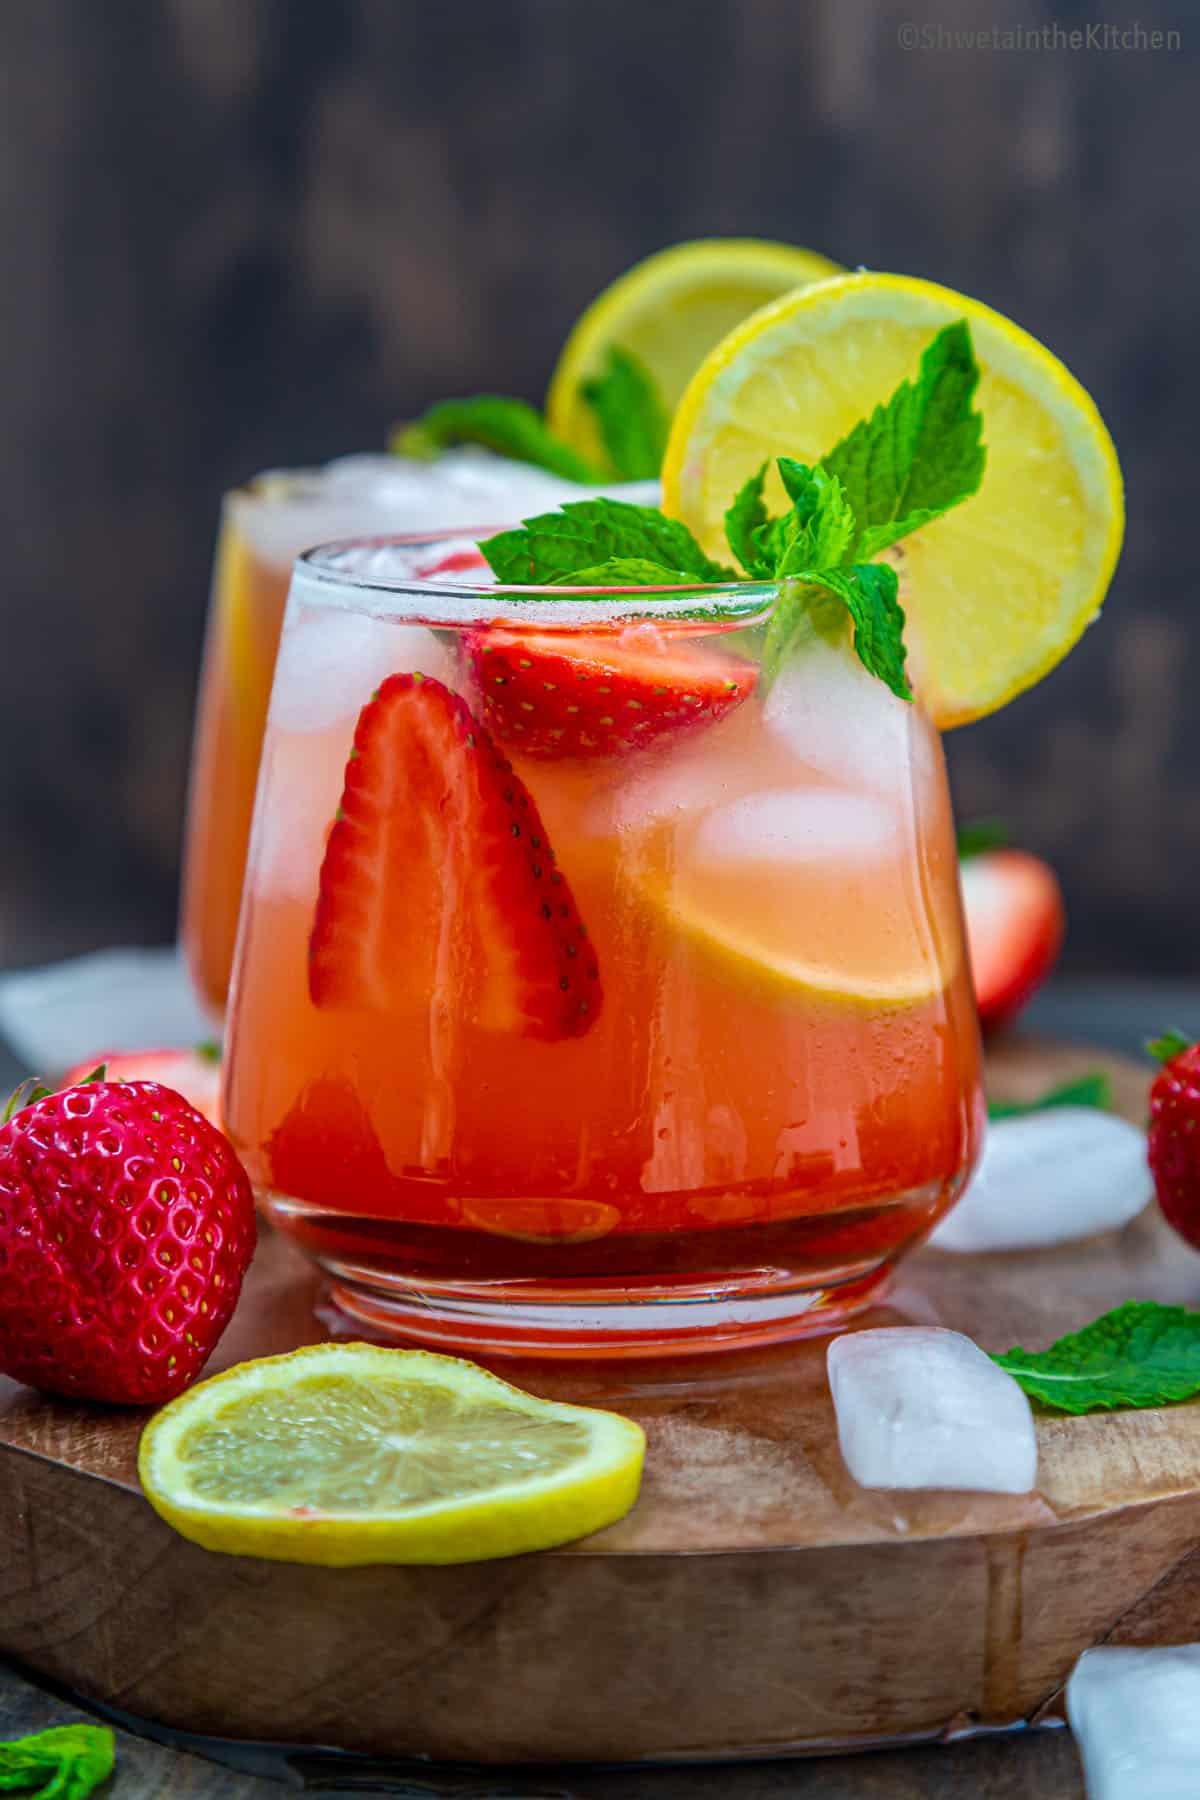 front view of chilled sparkling strawberry lemonade garnished with lemon slice and mint